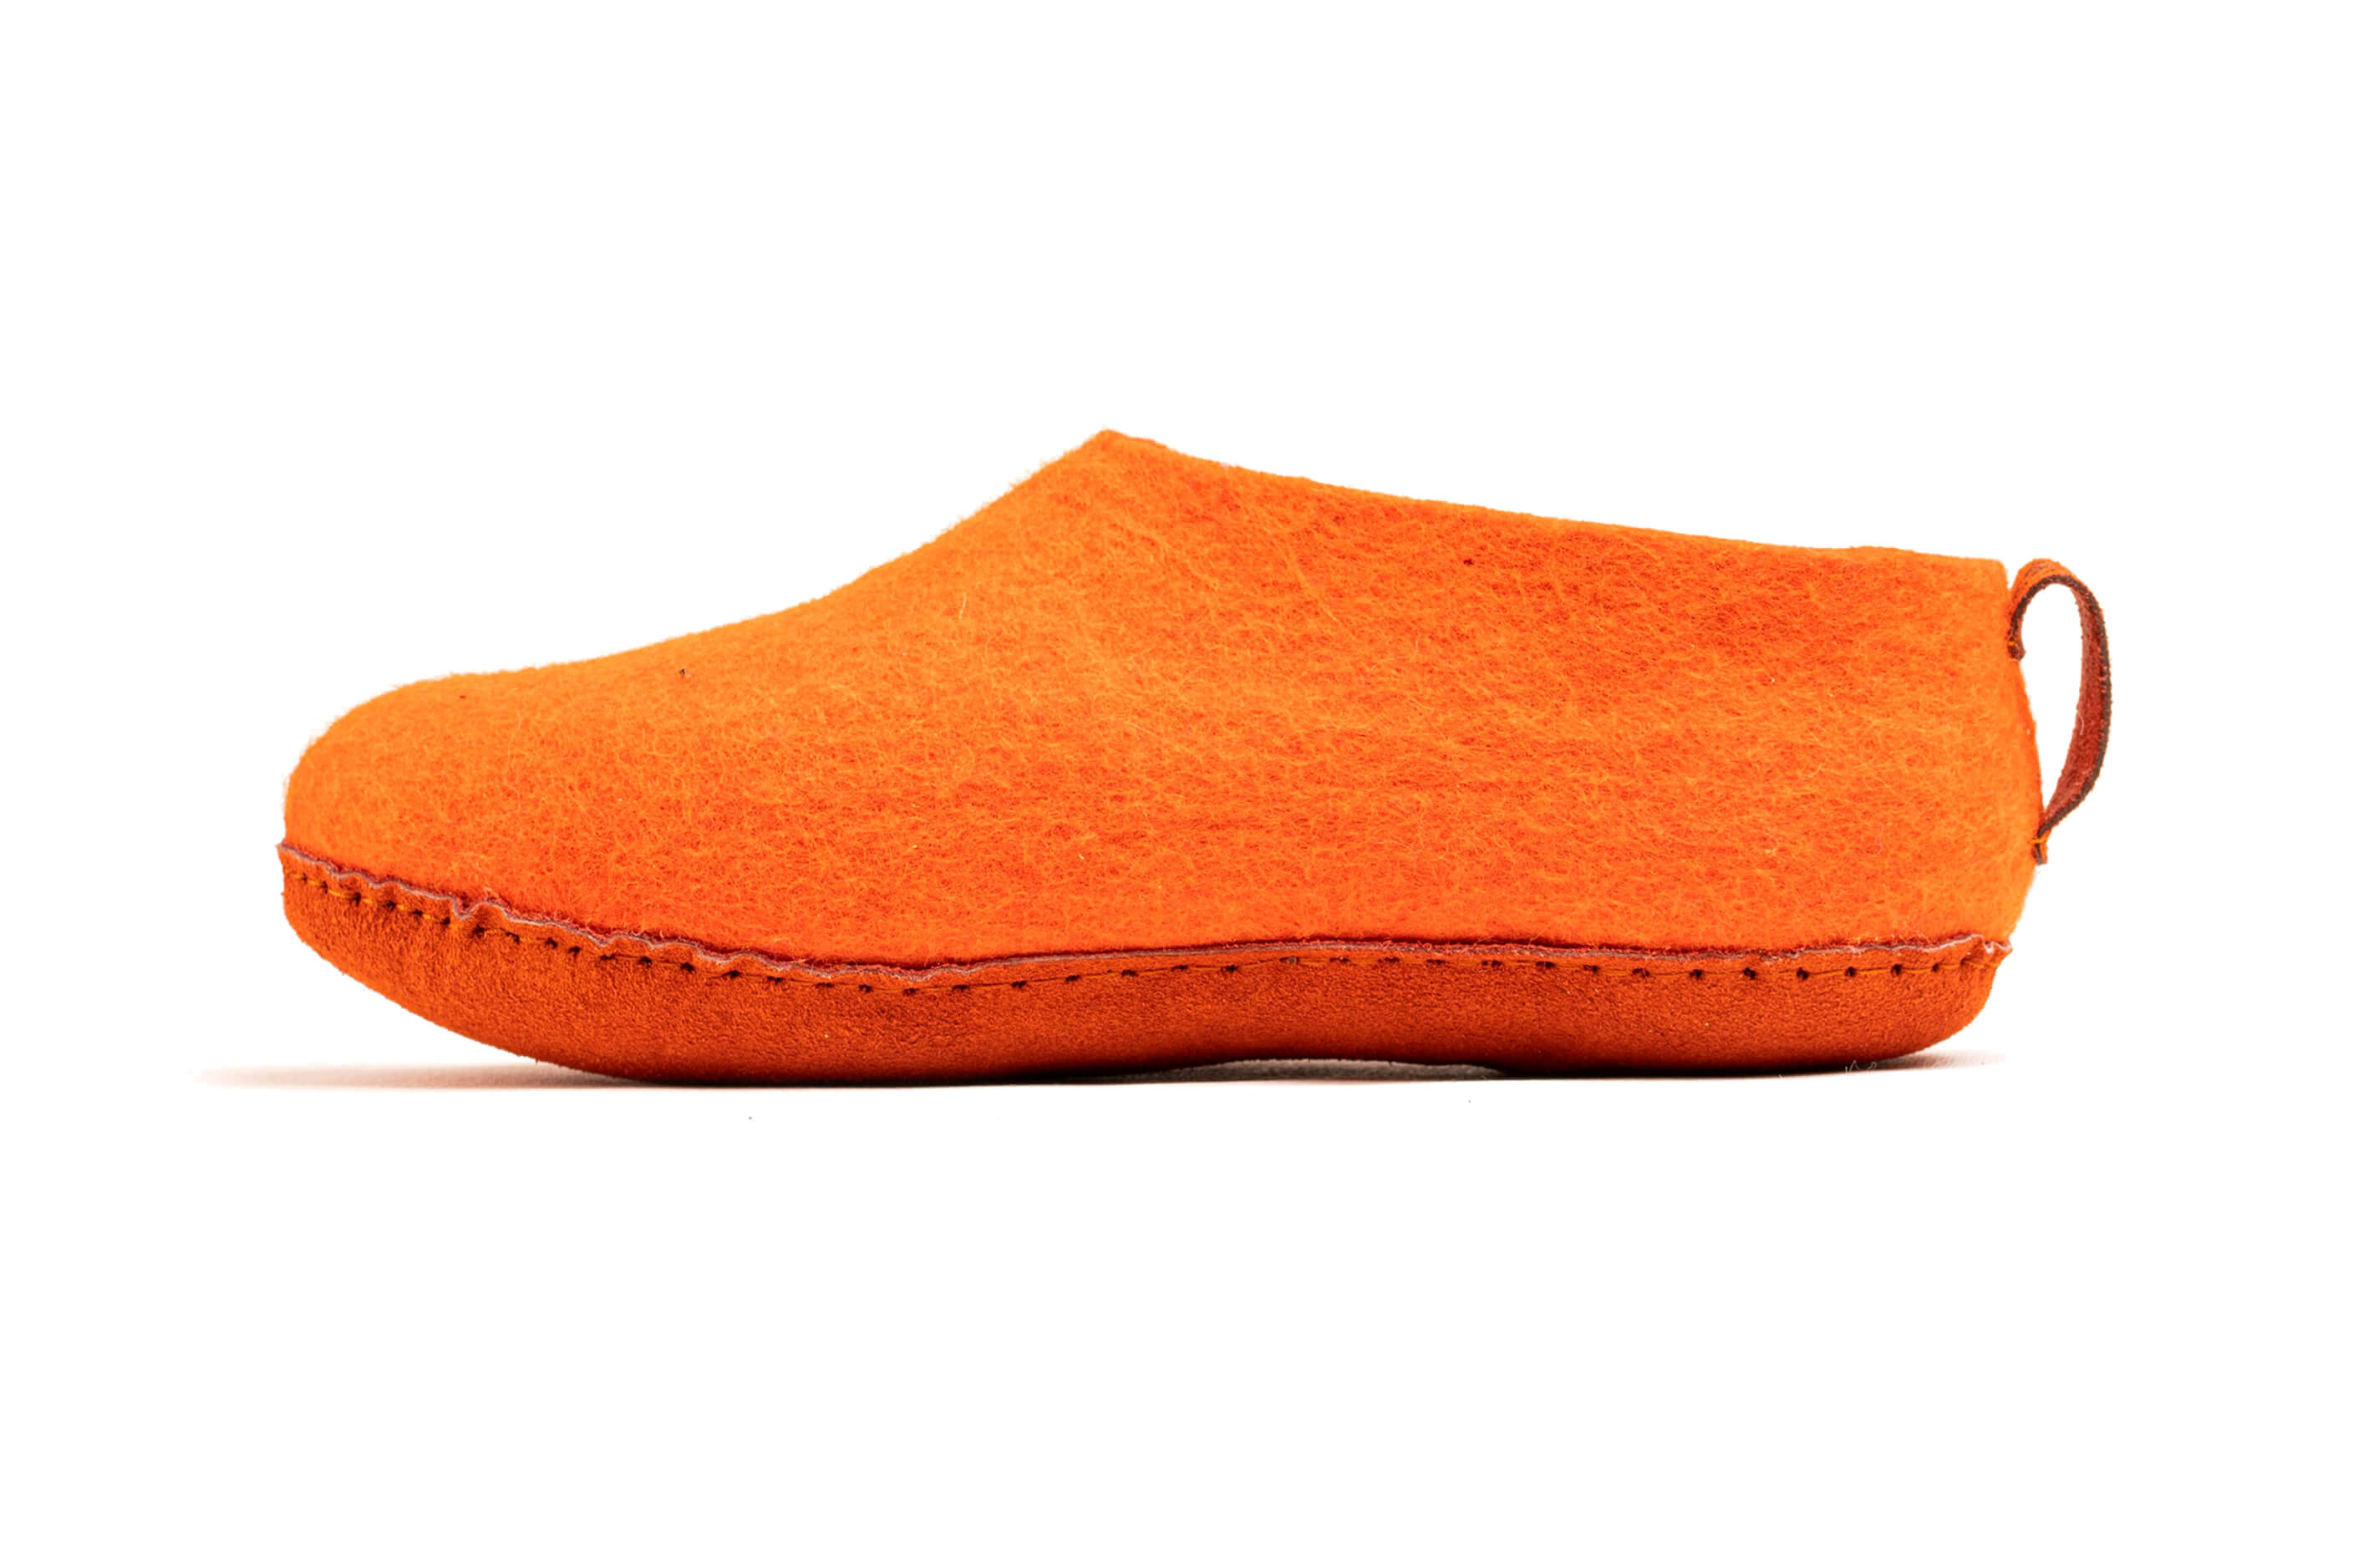 Indoor Shoes With Leather Sole-Orange